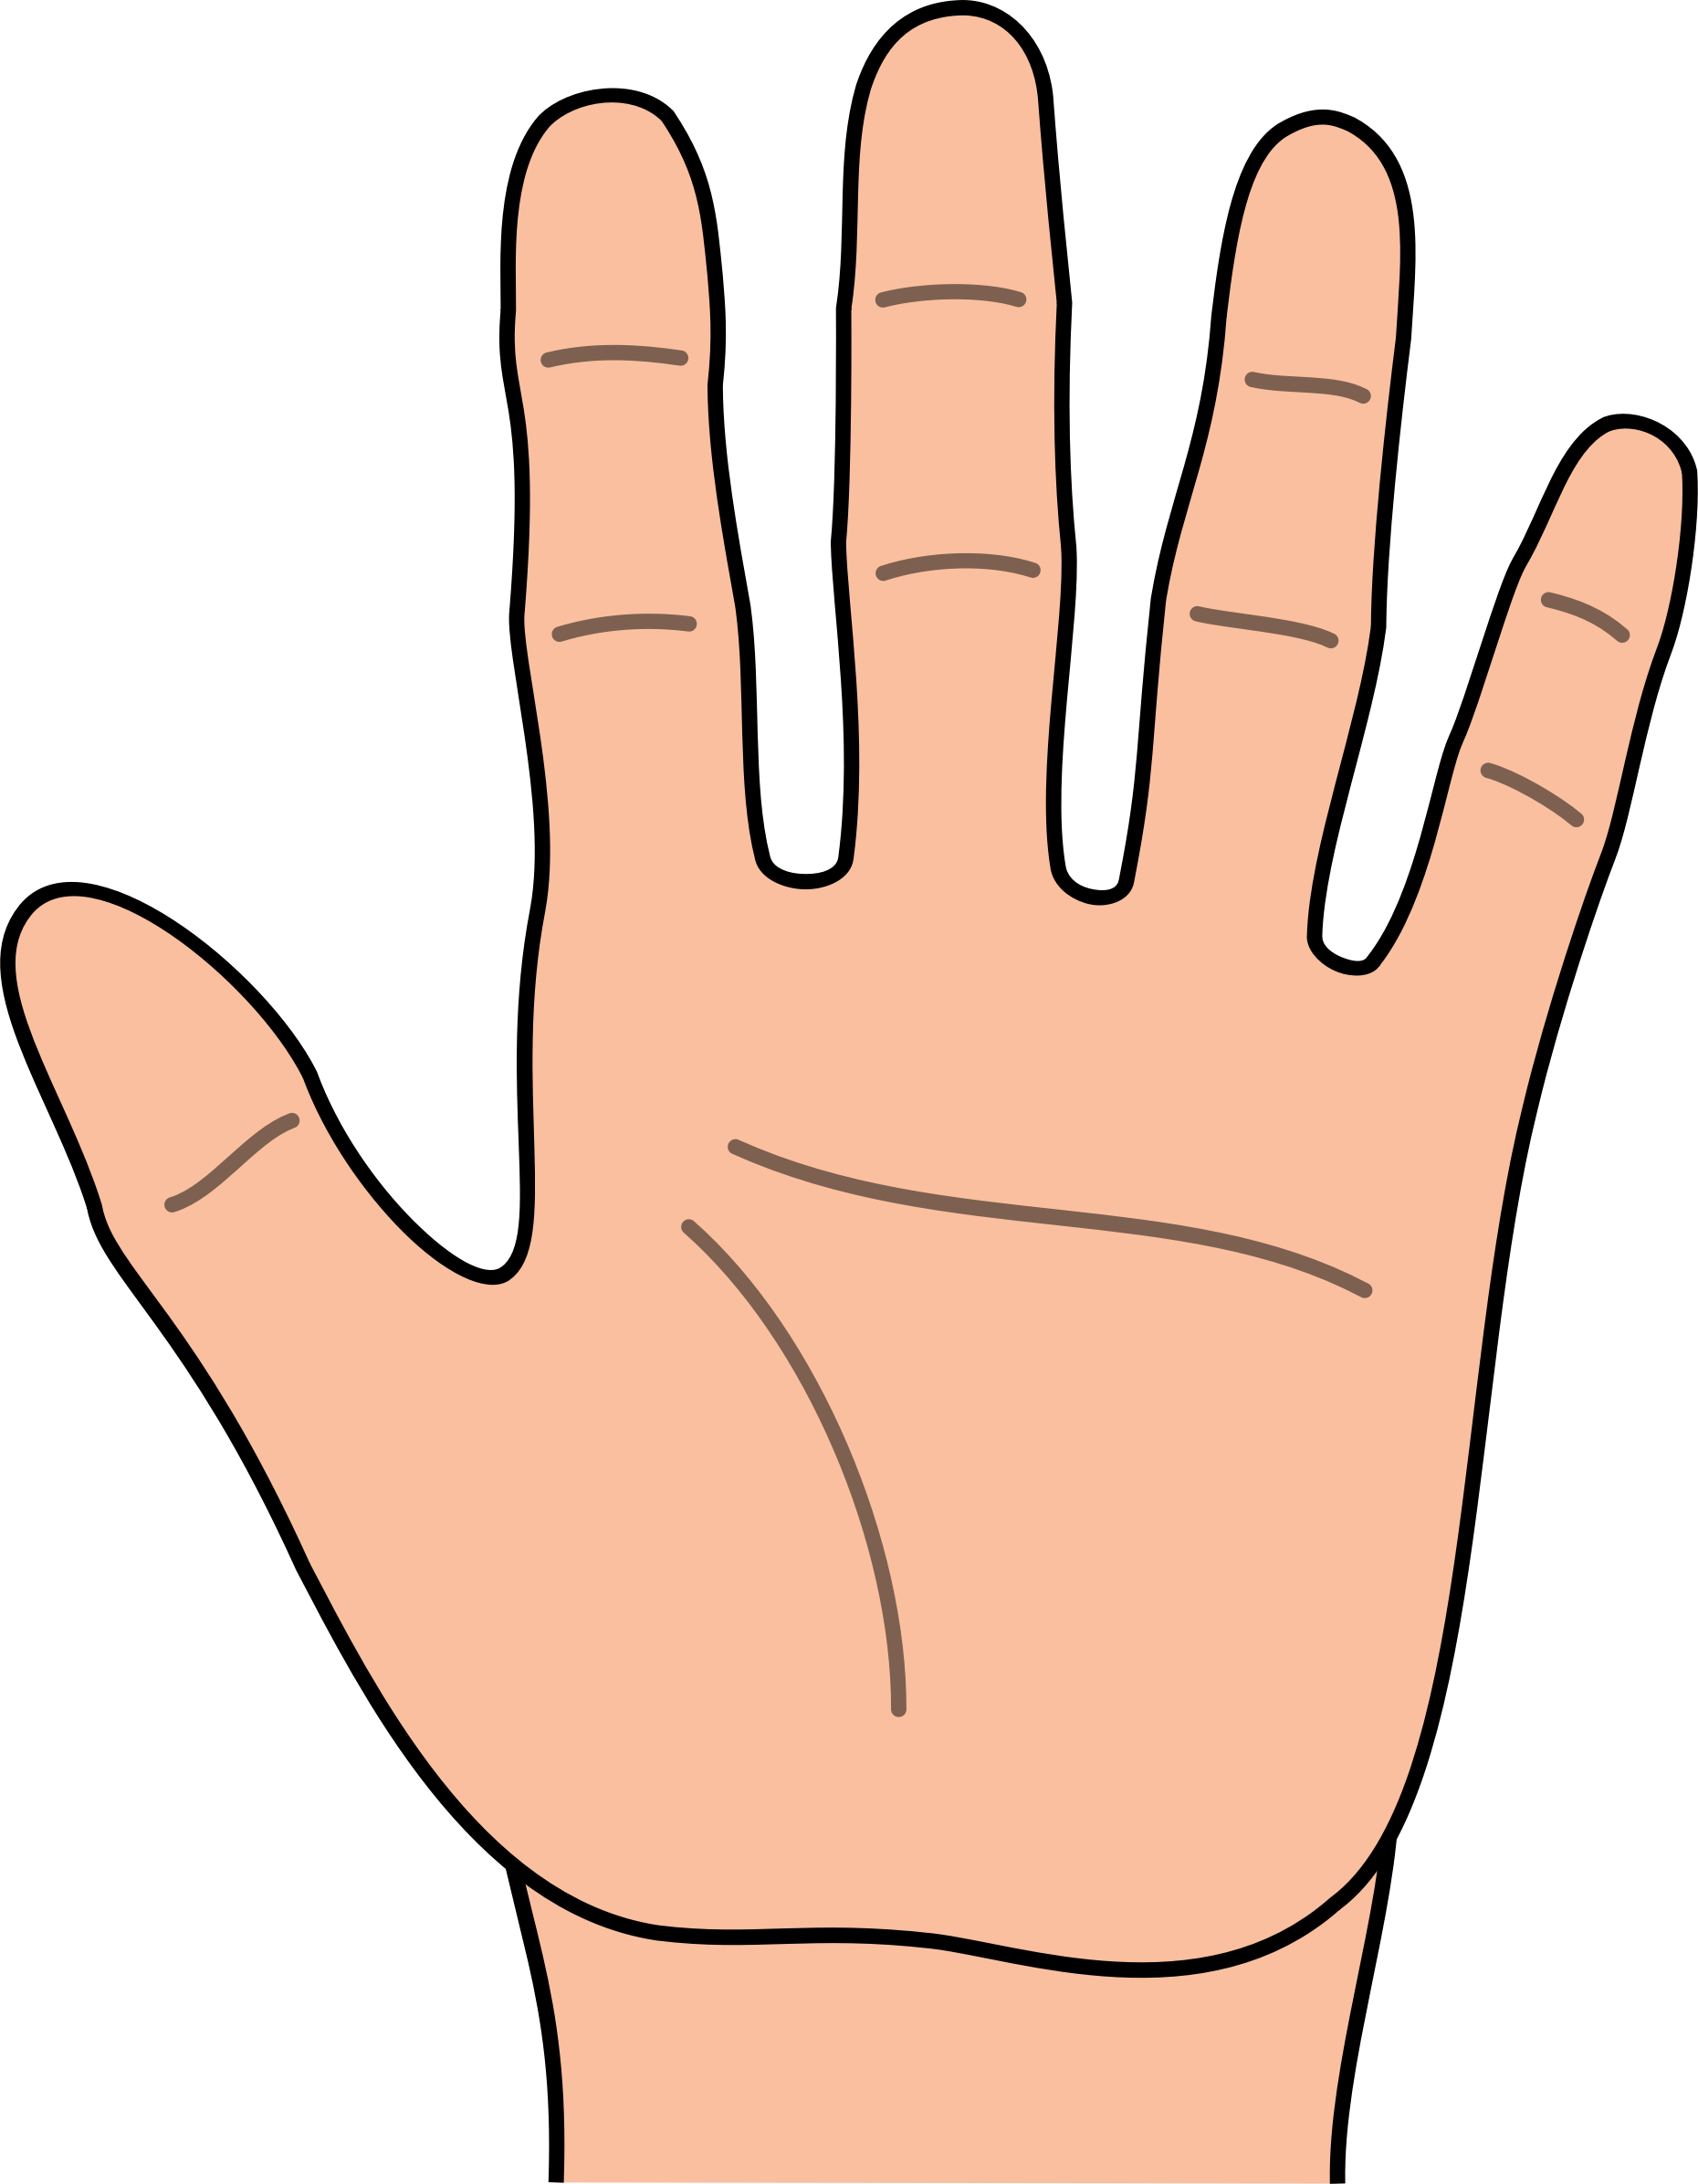 free vector clipart hands - photo #50